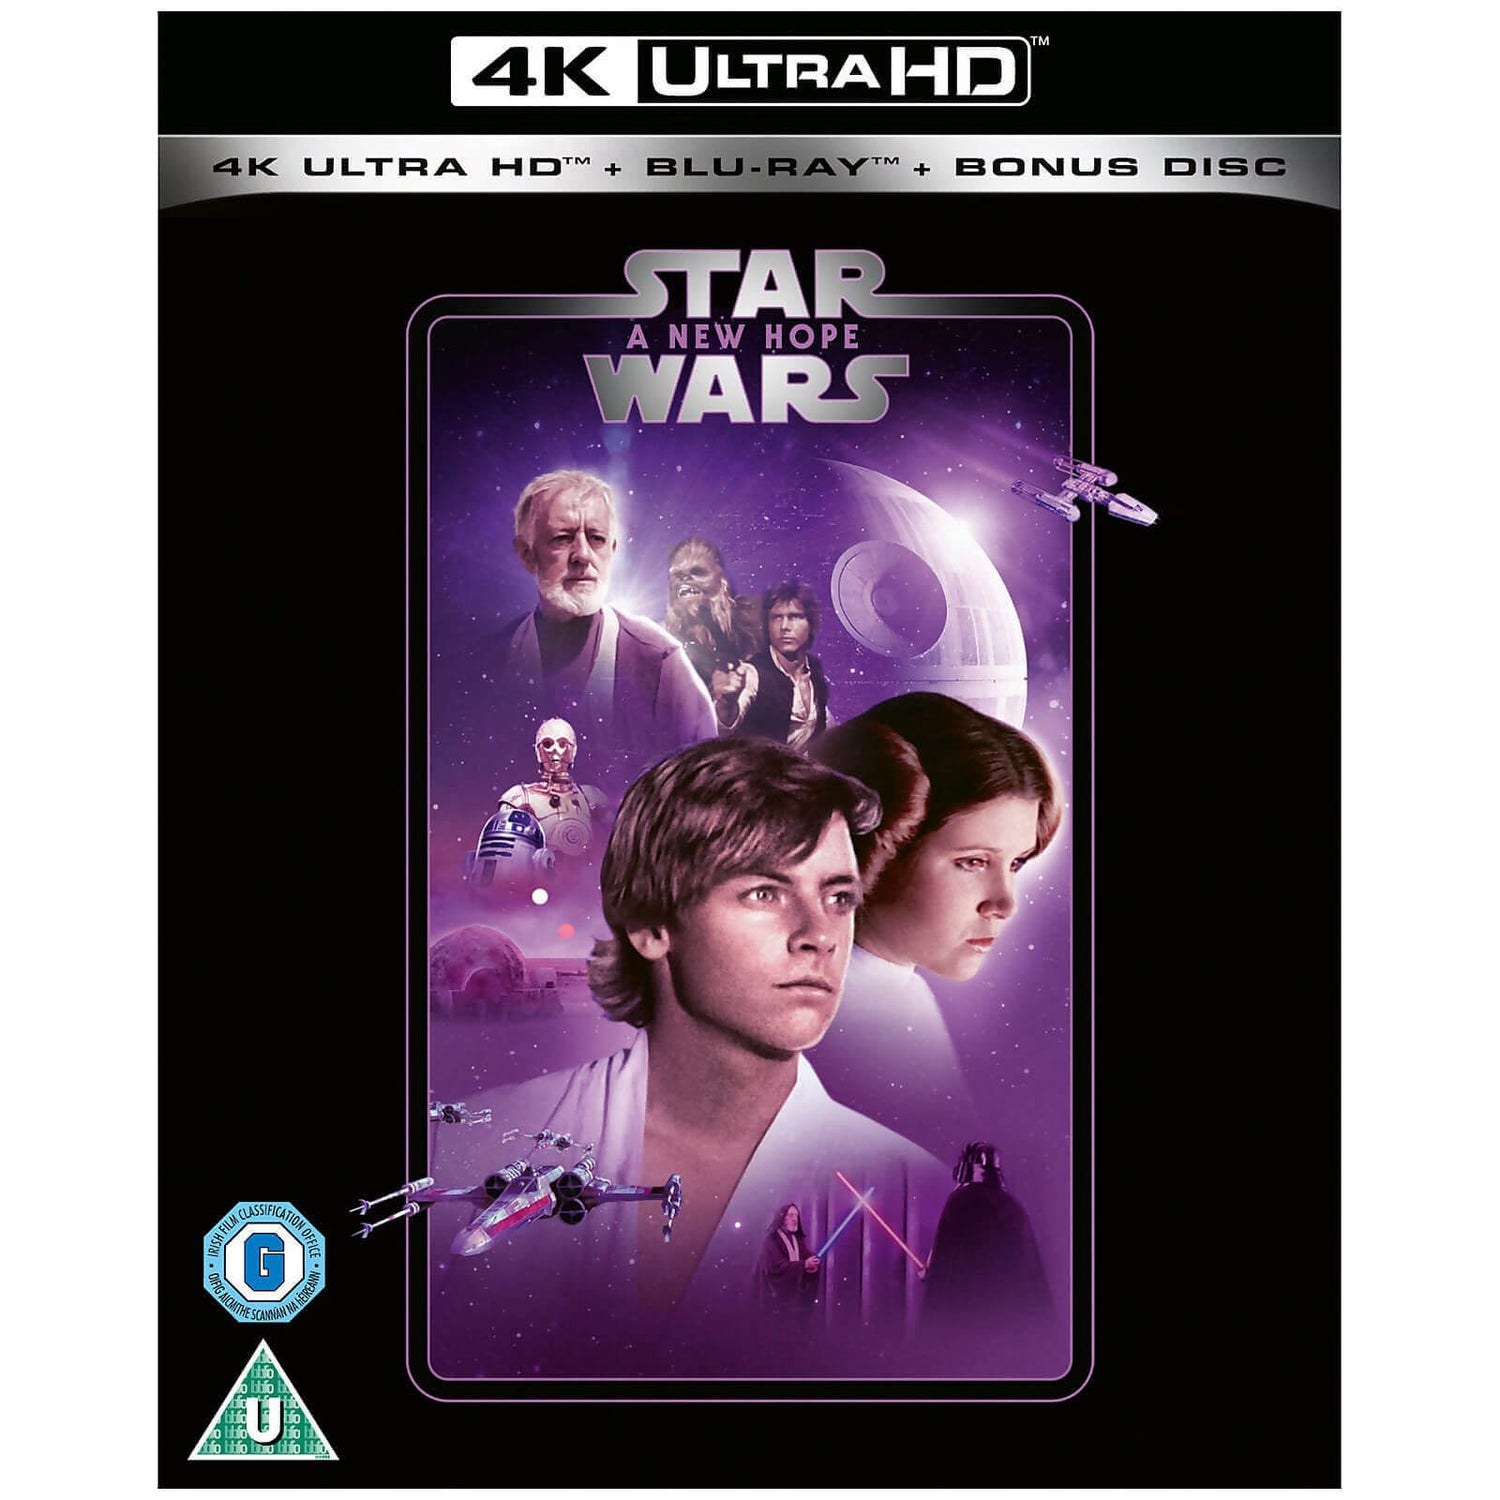 Star Wars: Episode VII - The Force Awakens - 4K Ultra HD Blu-ray Ultra HD  Review